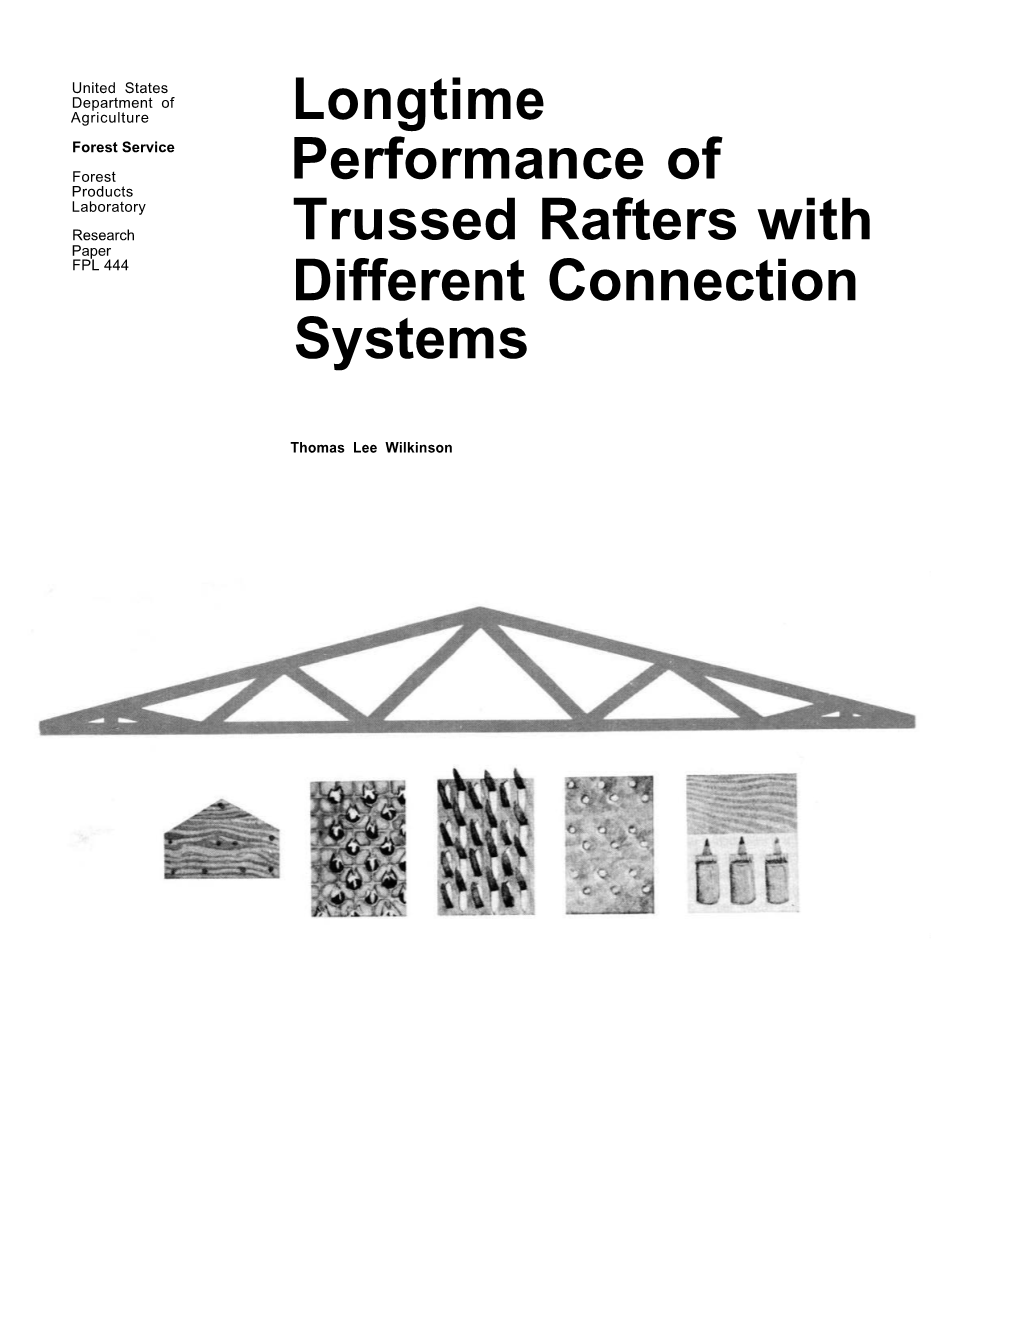 Longtime Performance of Trussed Rafters with Different Connection Systems